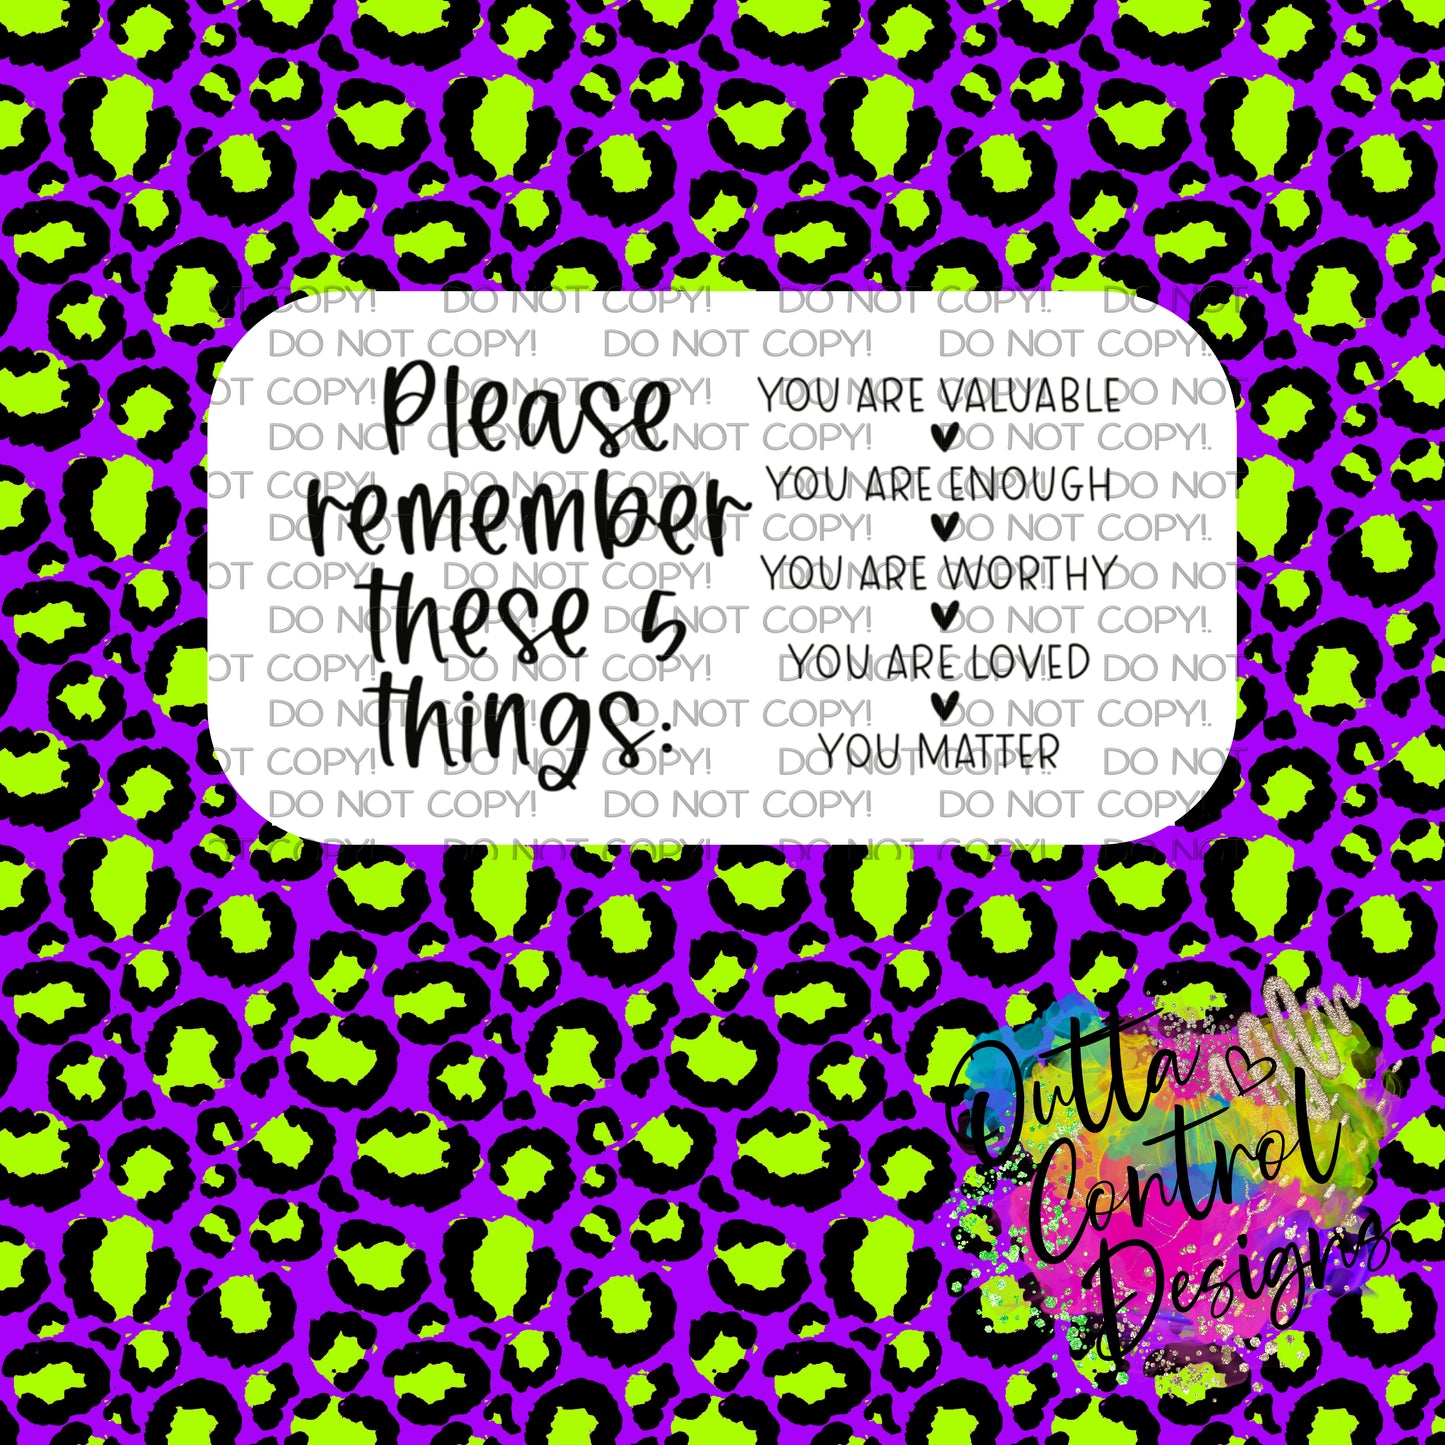 Please remember you are these 5 things Thermal Sticker (25 per order)